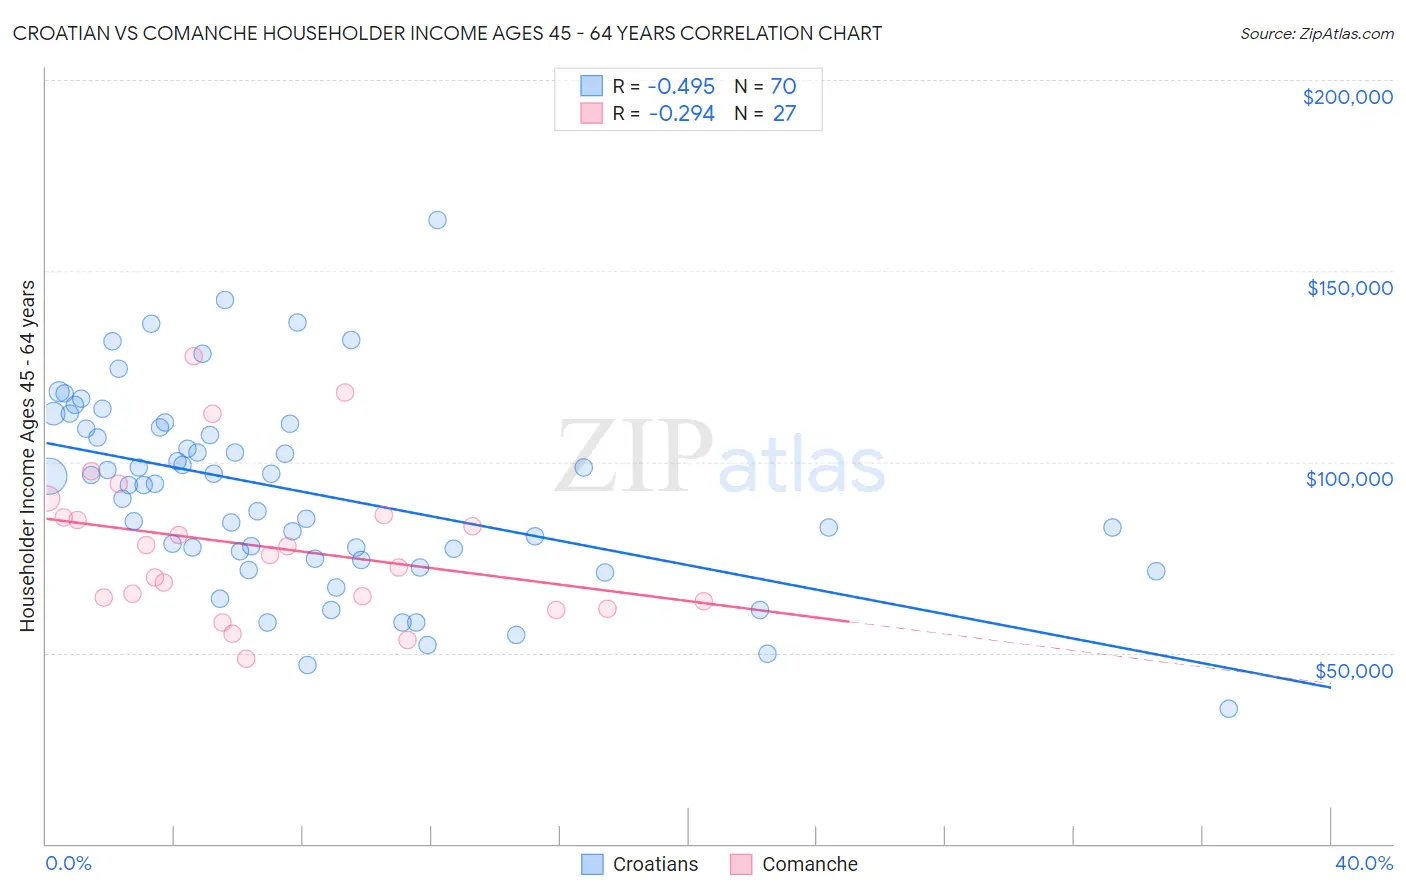 Croatian vs Comanche Householder Income Ages 45 - 64 years